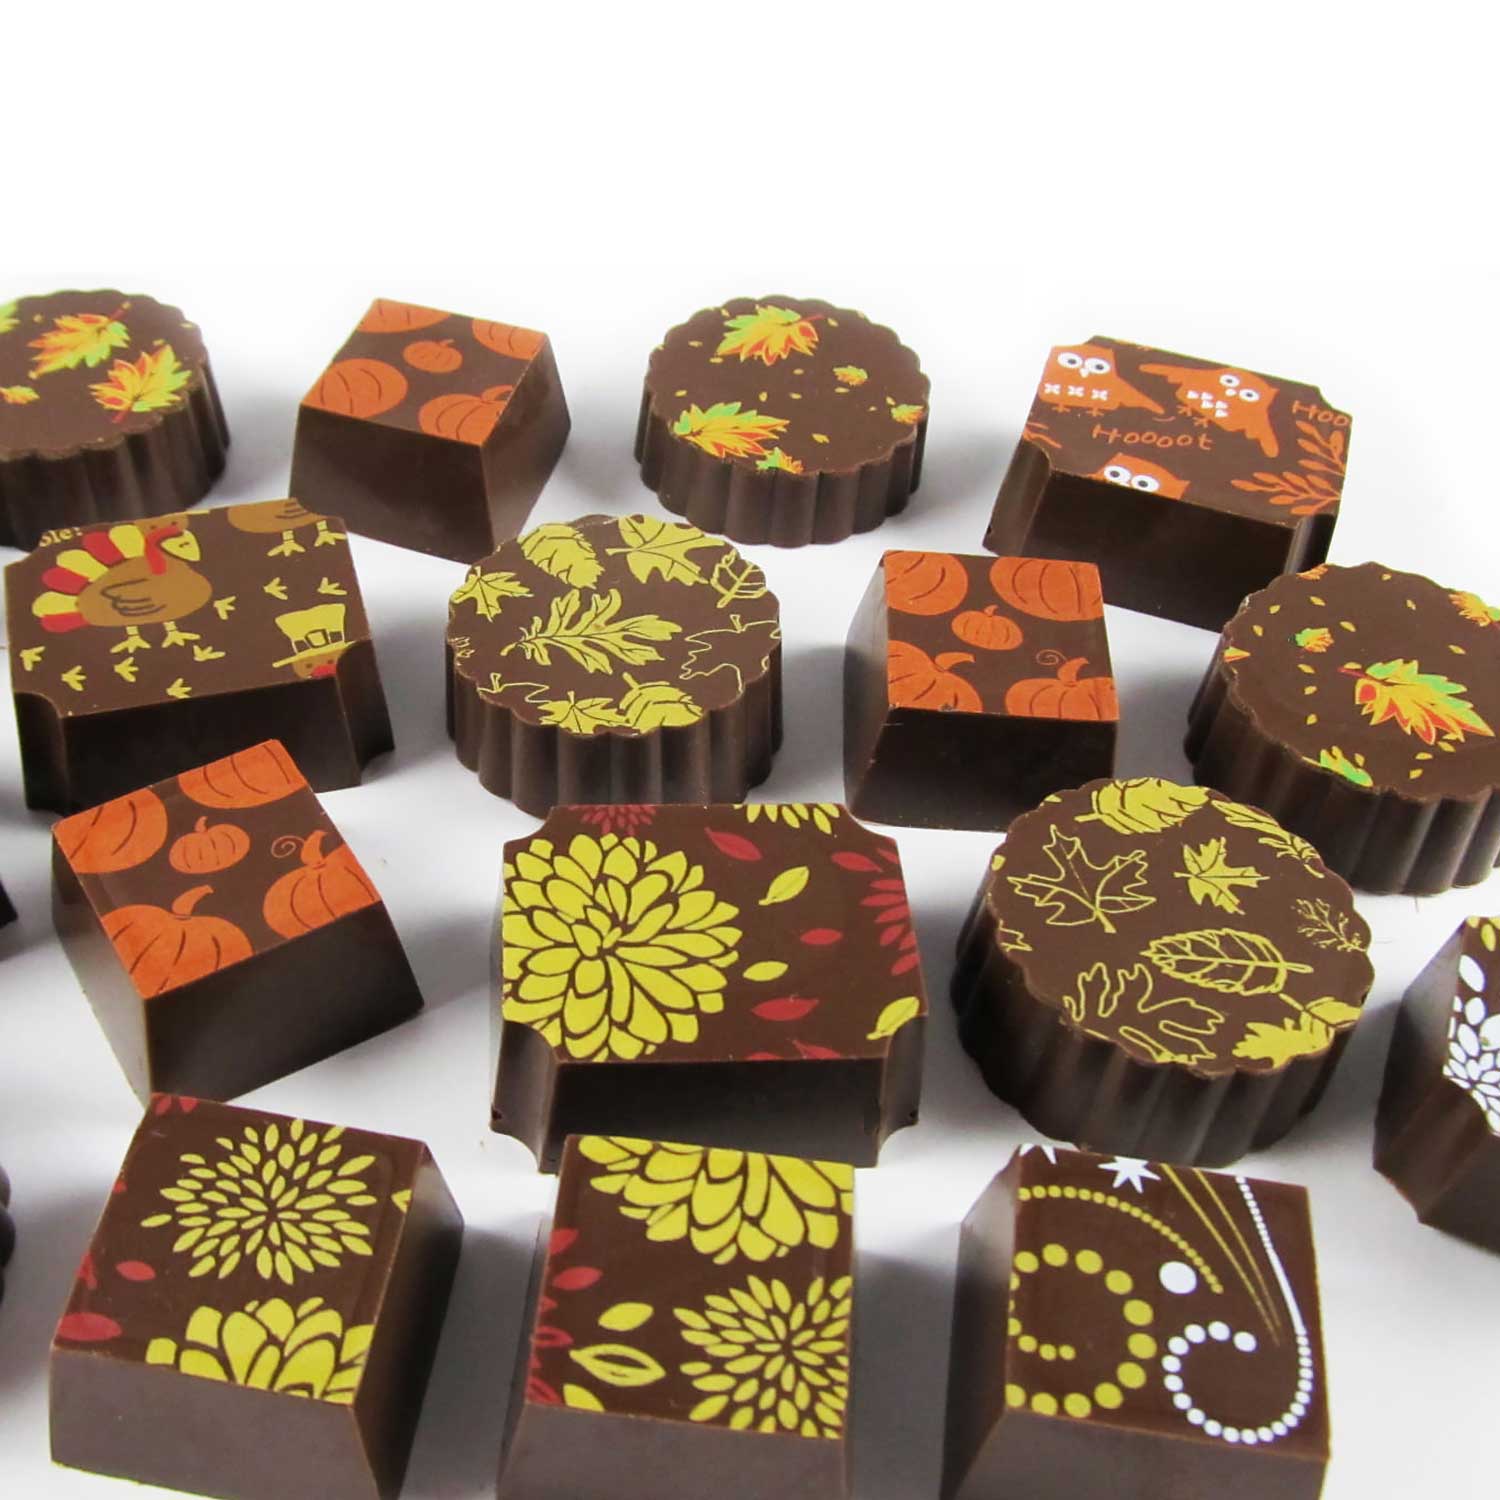 Custom Design Chocolates - Call to order - André's Confiserie Suisse